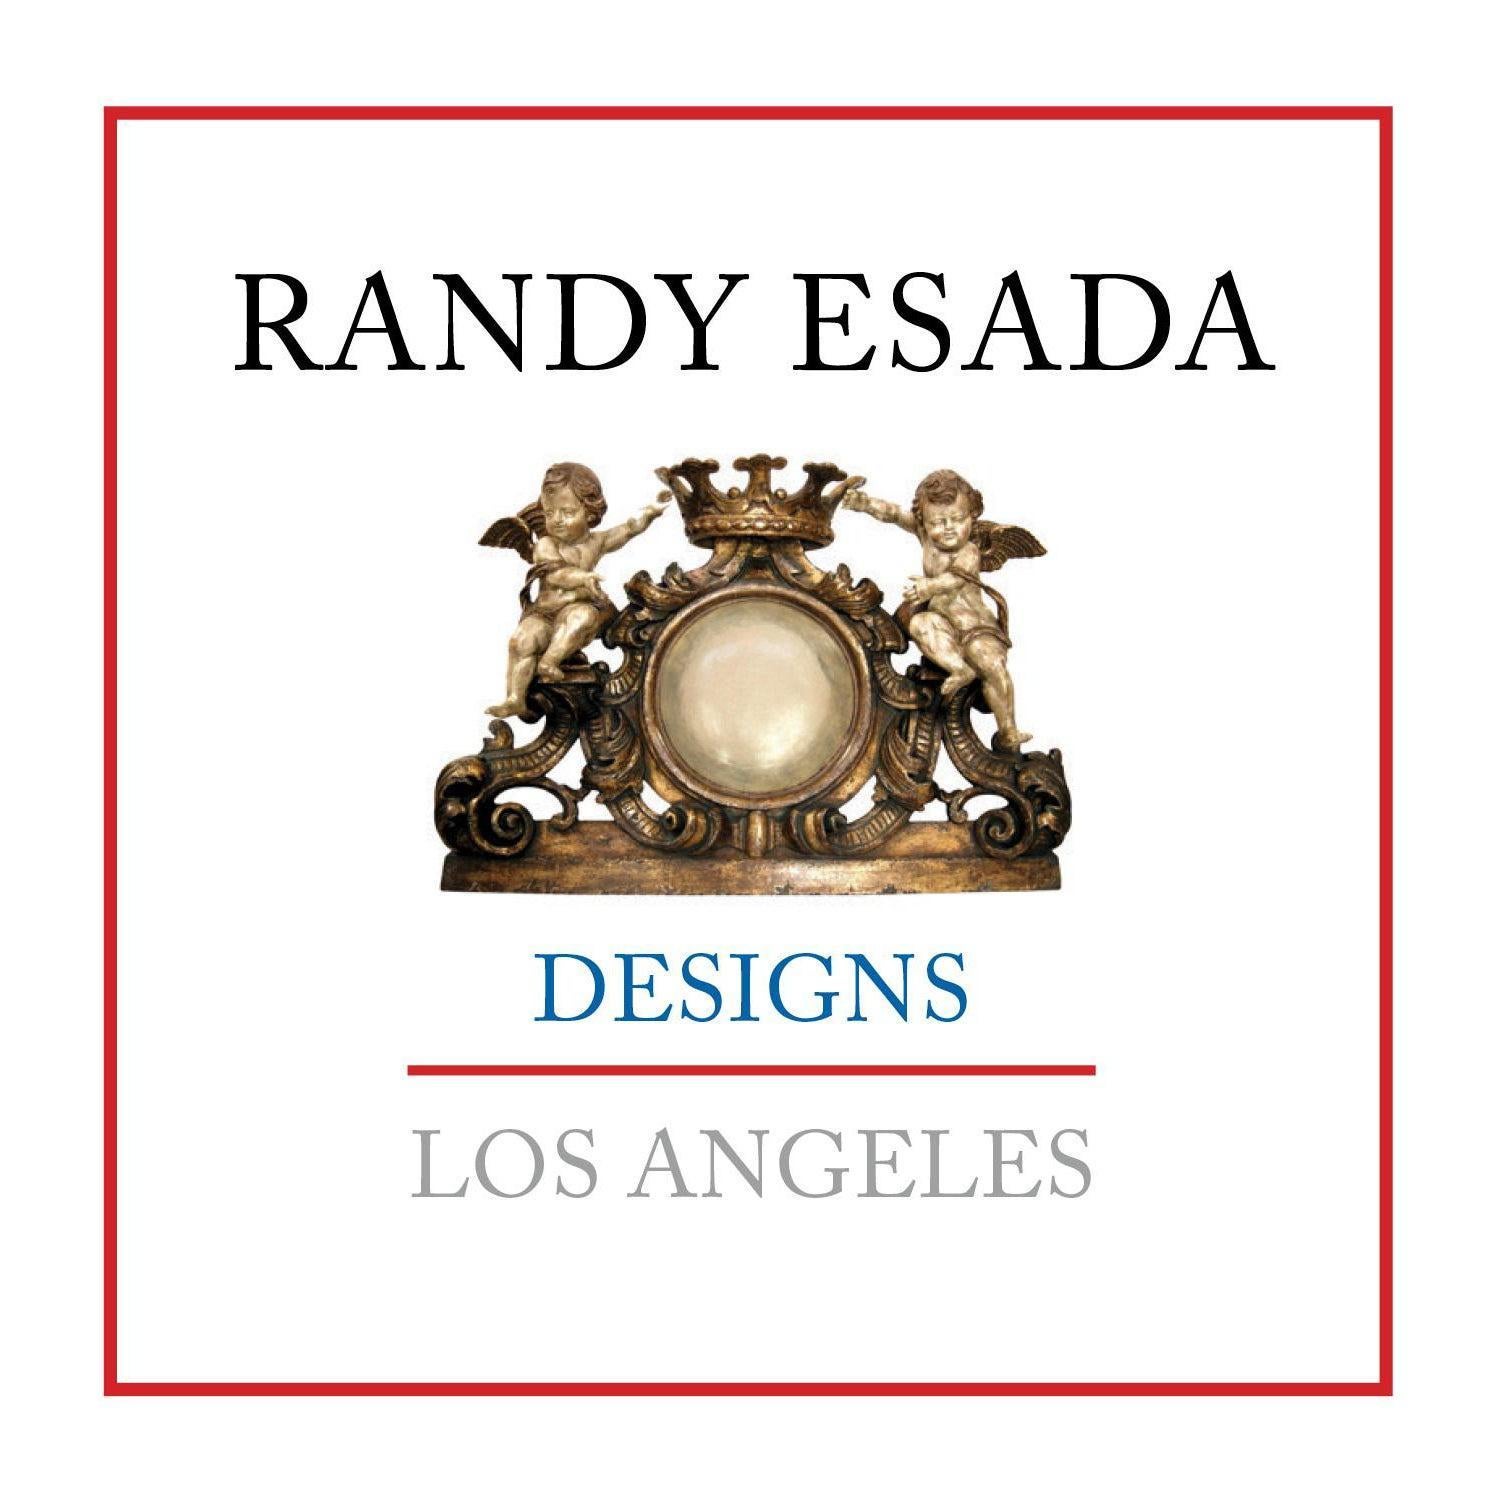 Pair of Regency style giltwood designer Marbella side tables by Randy Esada.

​Note: Custom orders require a deposit and cannot be canceled.  All custom order deposits are non-refundable.  